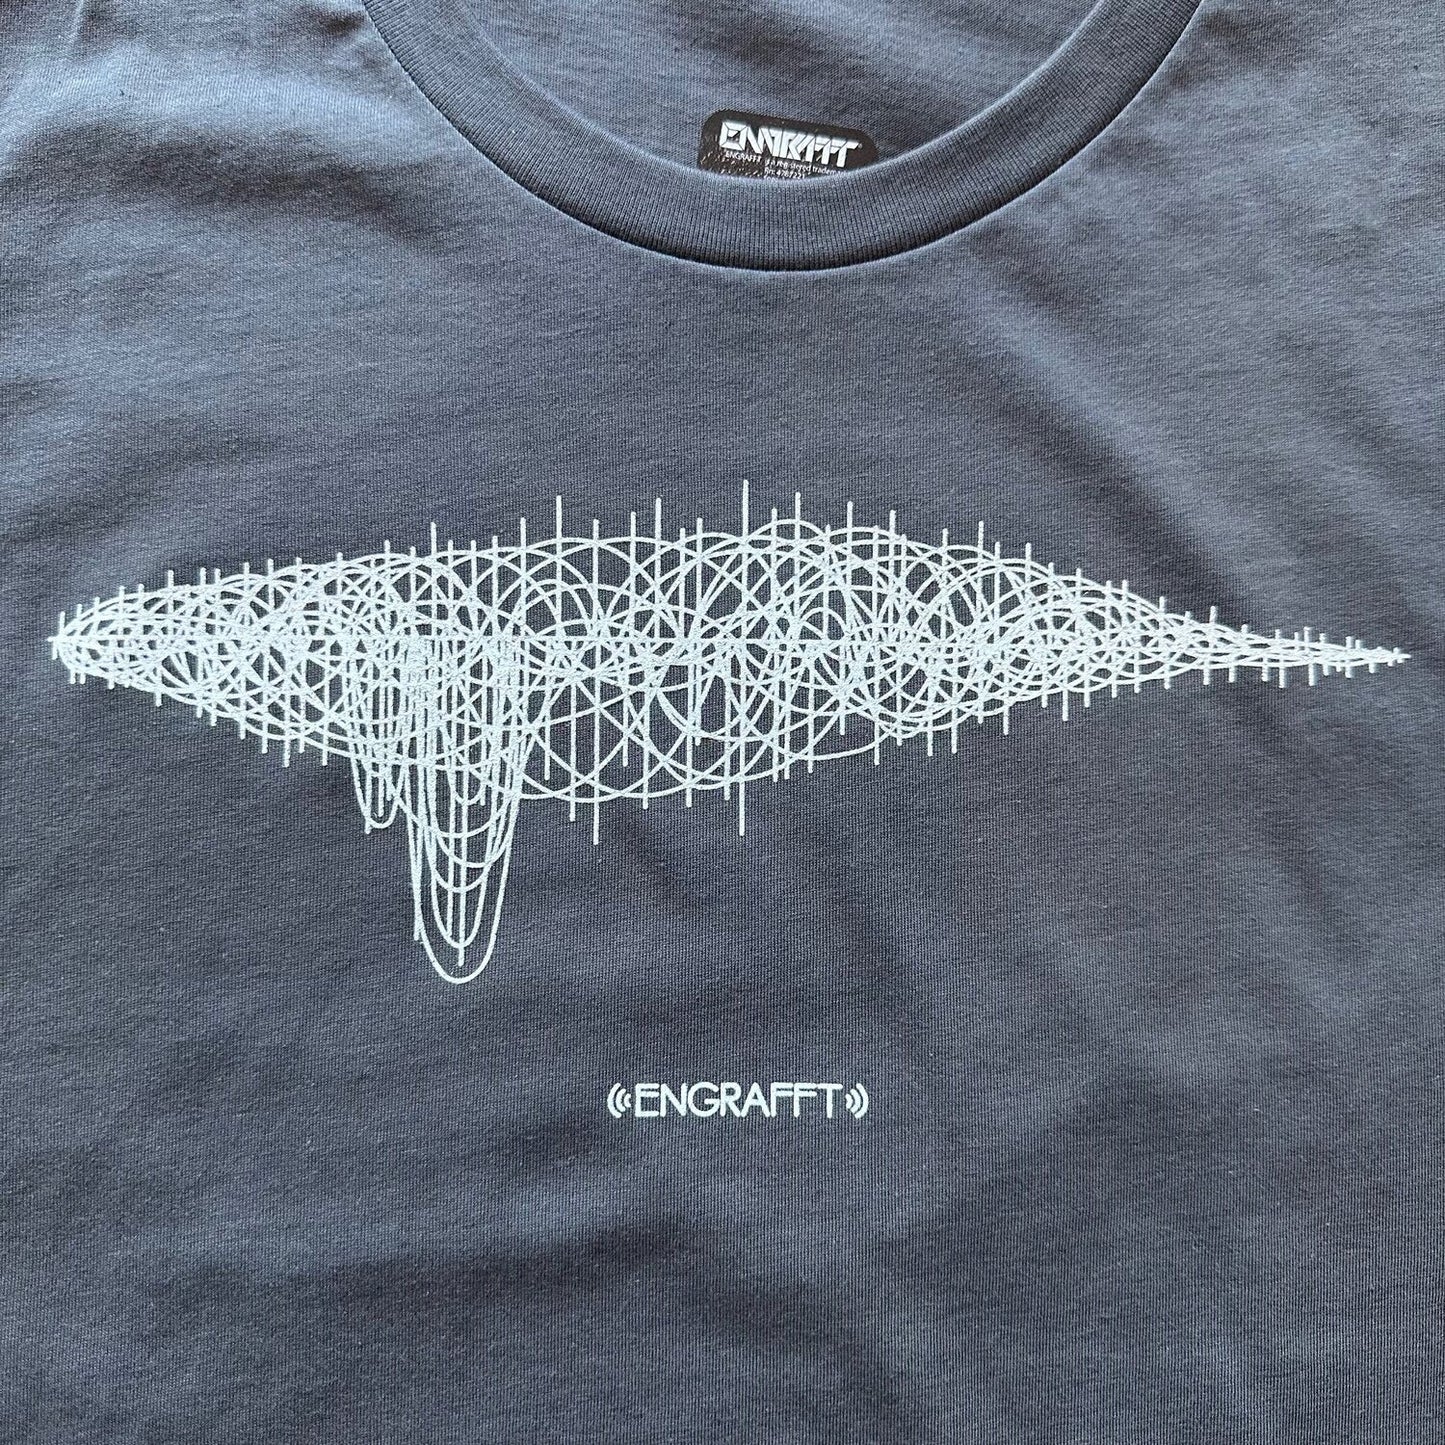 ENGRAFFT - The Whalesong Wavelength Tee